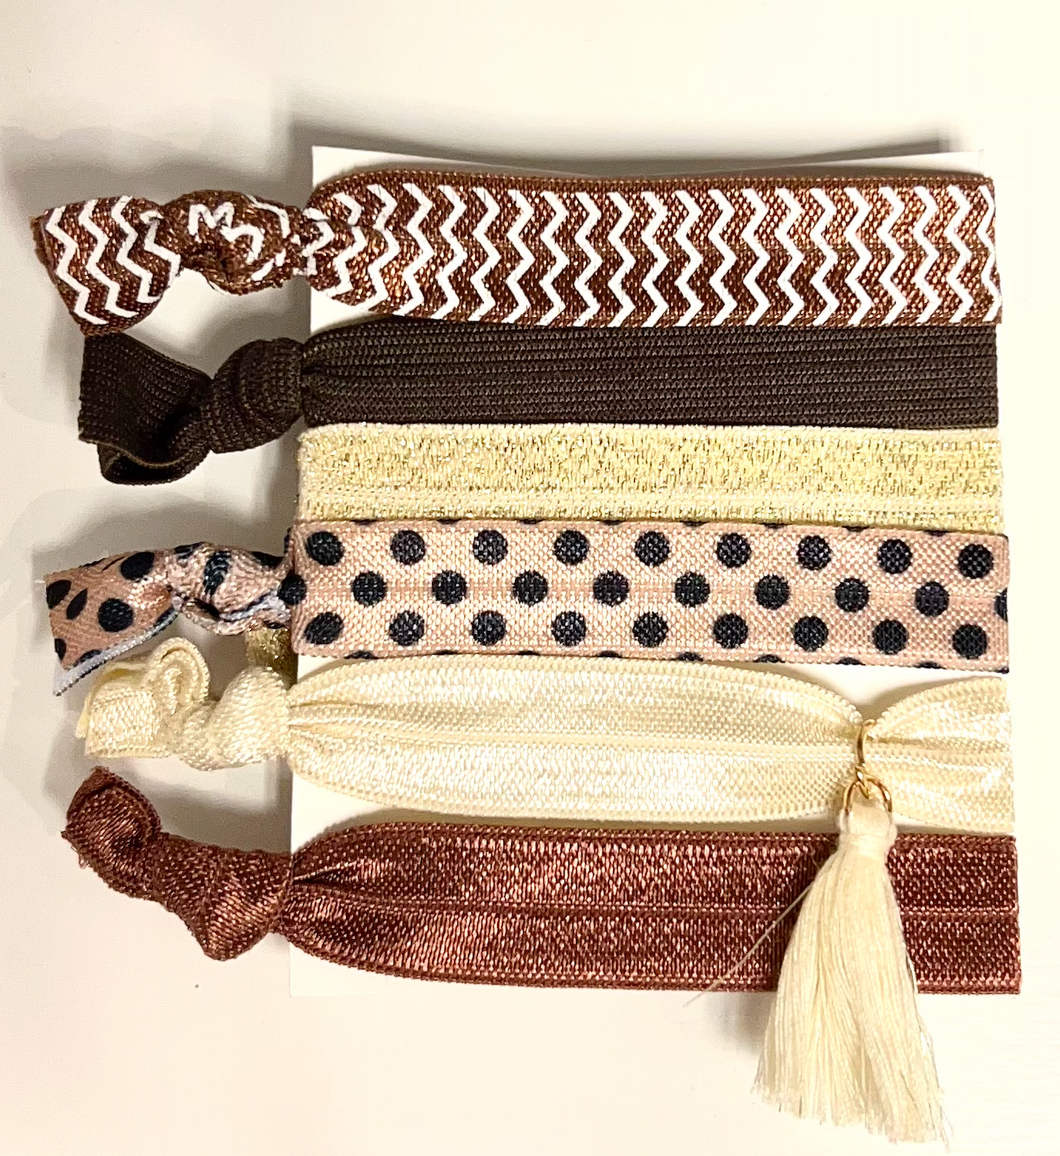 This set of hair ties features 6 different earth tone bobbles. The set includes a glittery gold hair tie, a chevron print, a spot print and 3 plain colours (brown, rust and cream). Perfect for keeping your hair tied up or even worn on your wrist as an accessory.